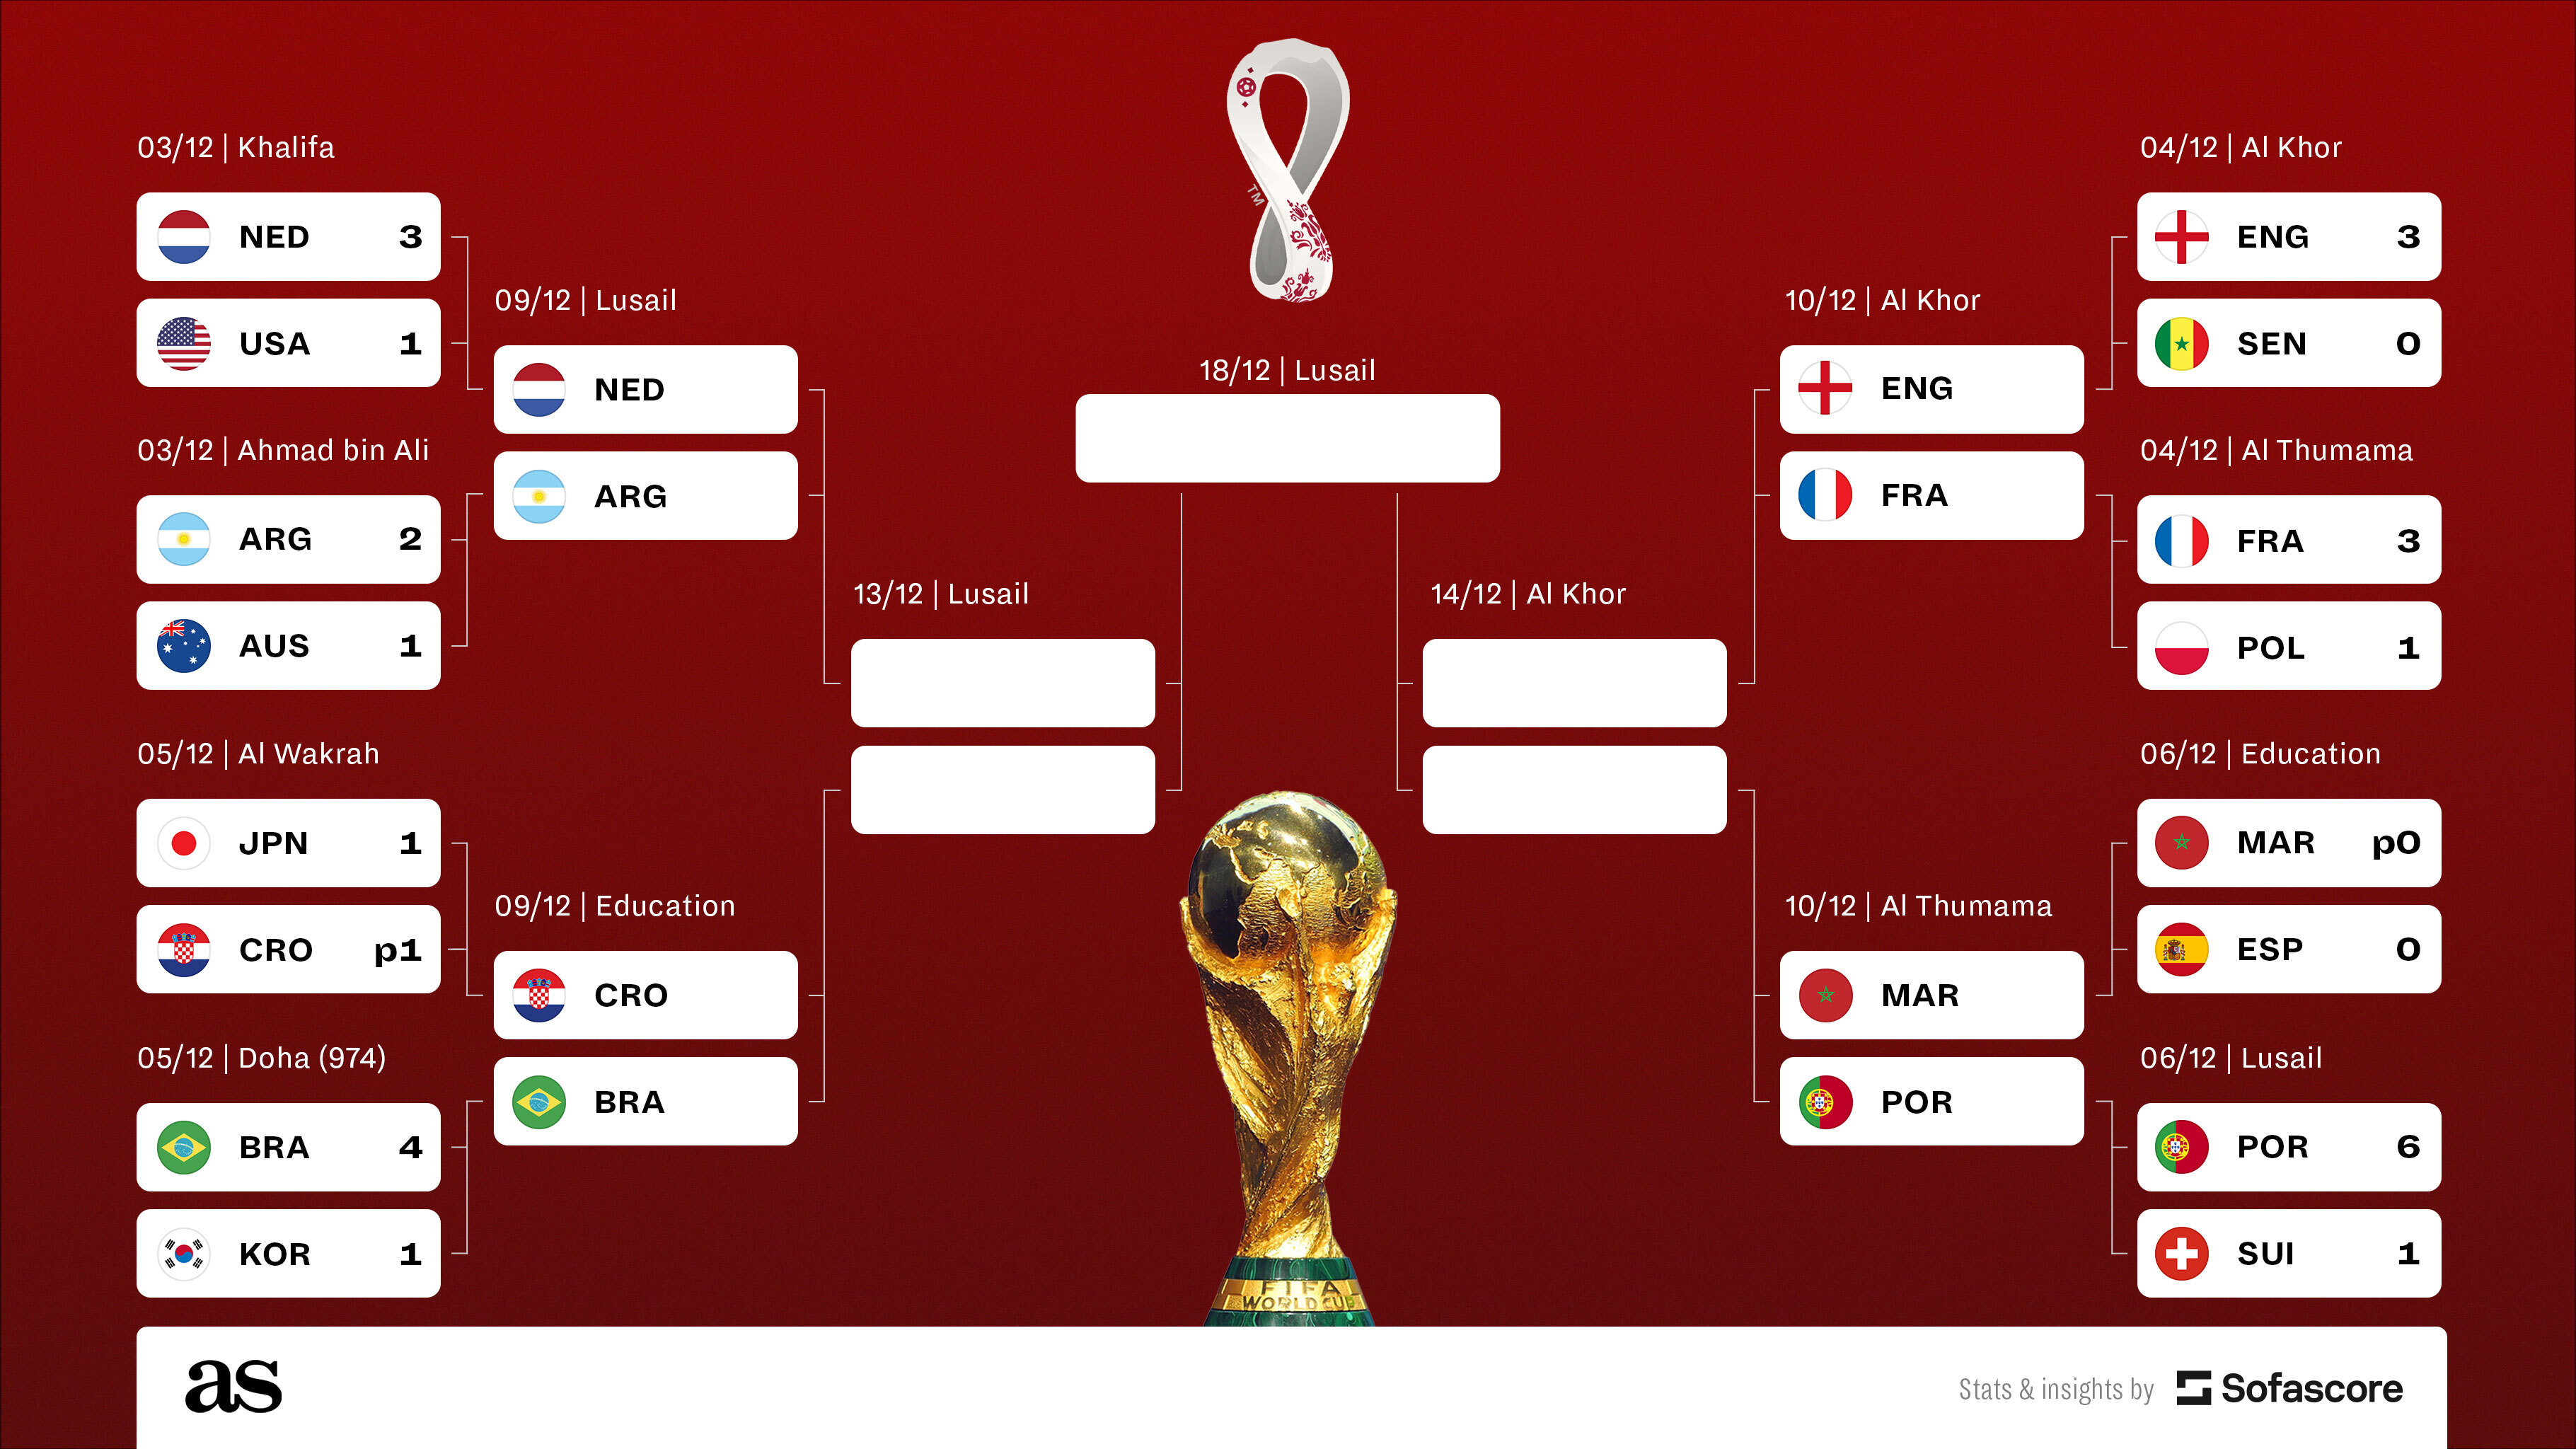 Qatar 2022 World Cup daily schedule who plays today, 9 December?